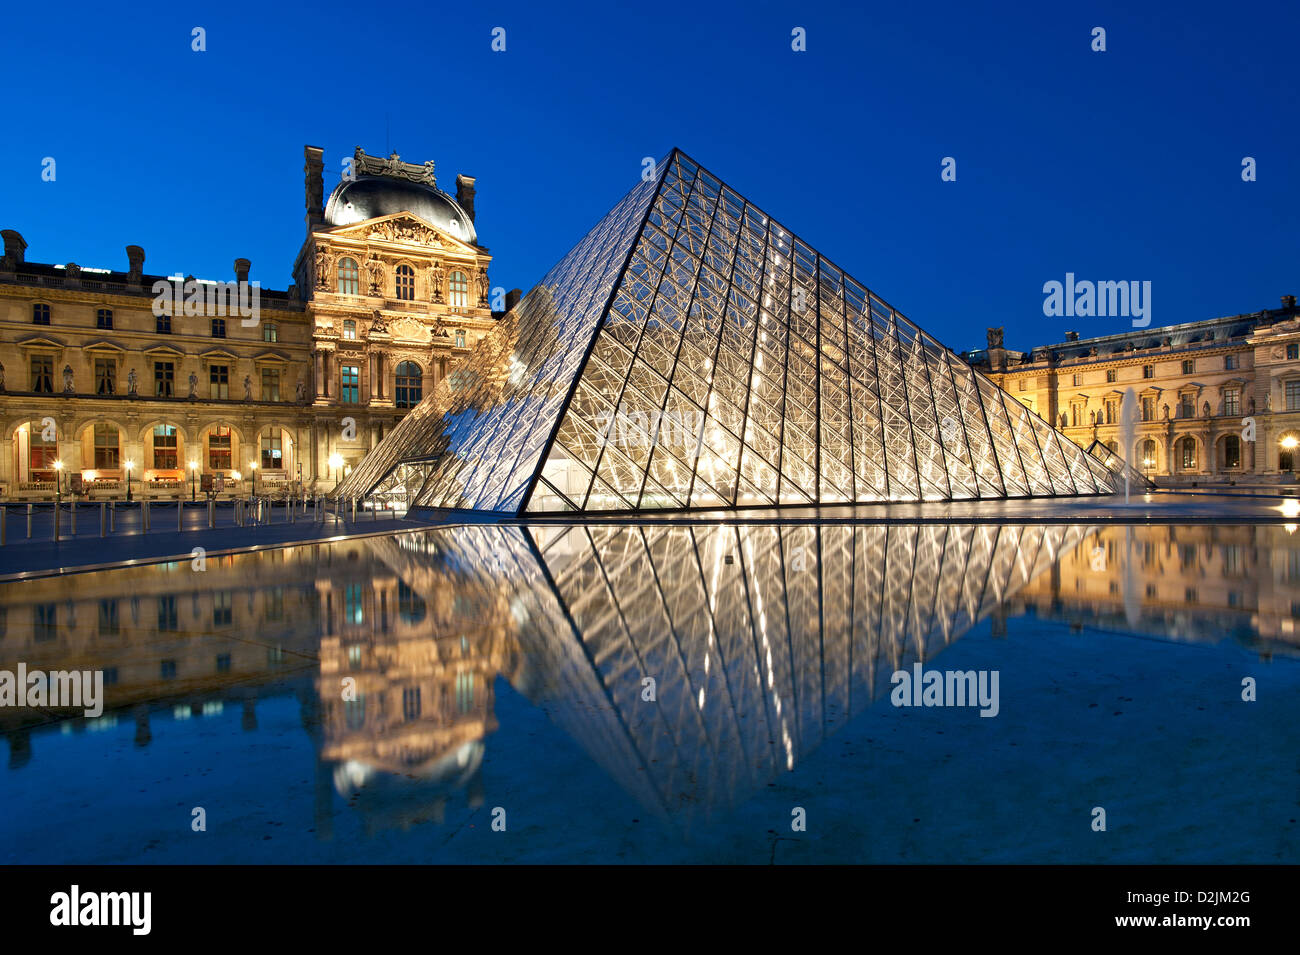 The Louvre at night Paris France Stock Photo - Alamy